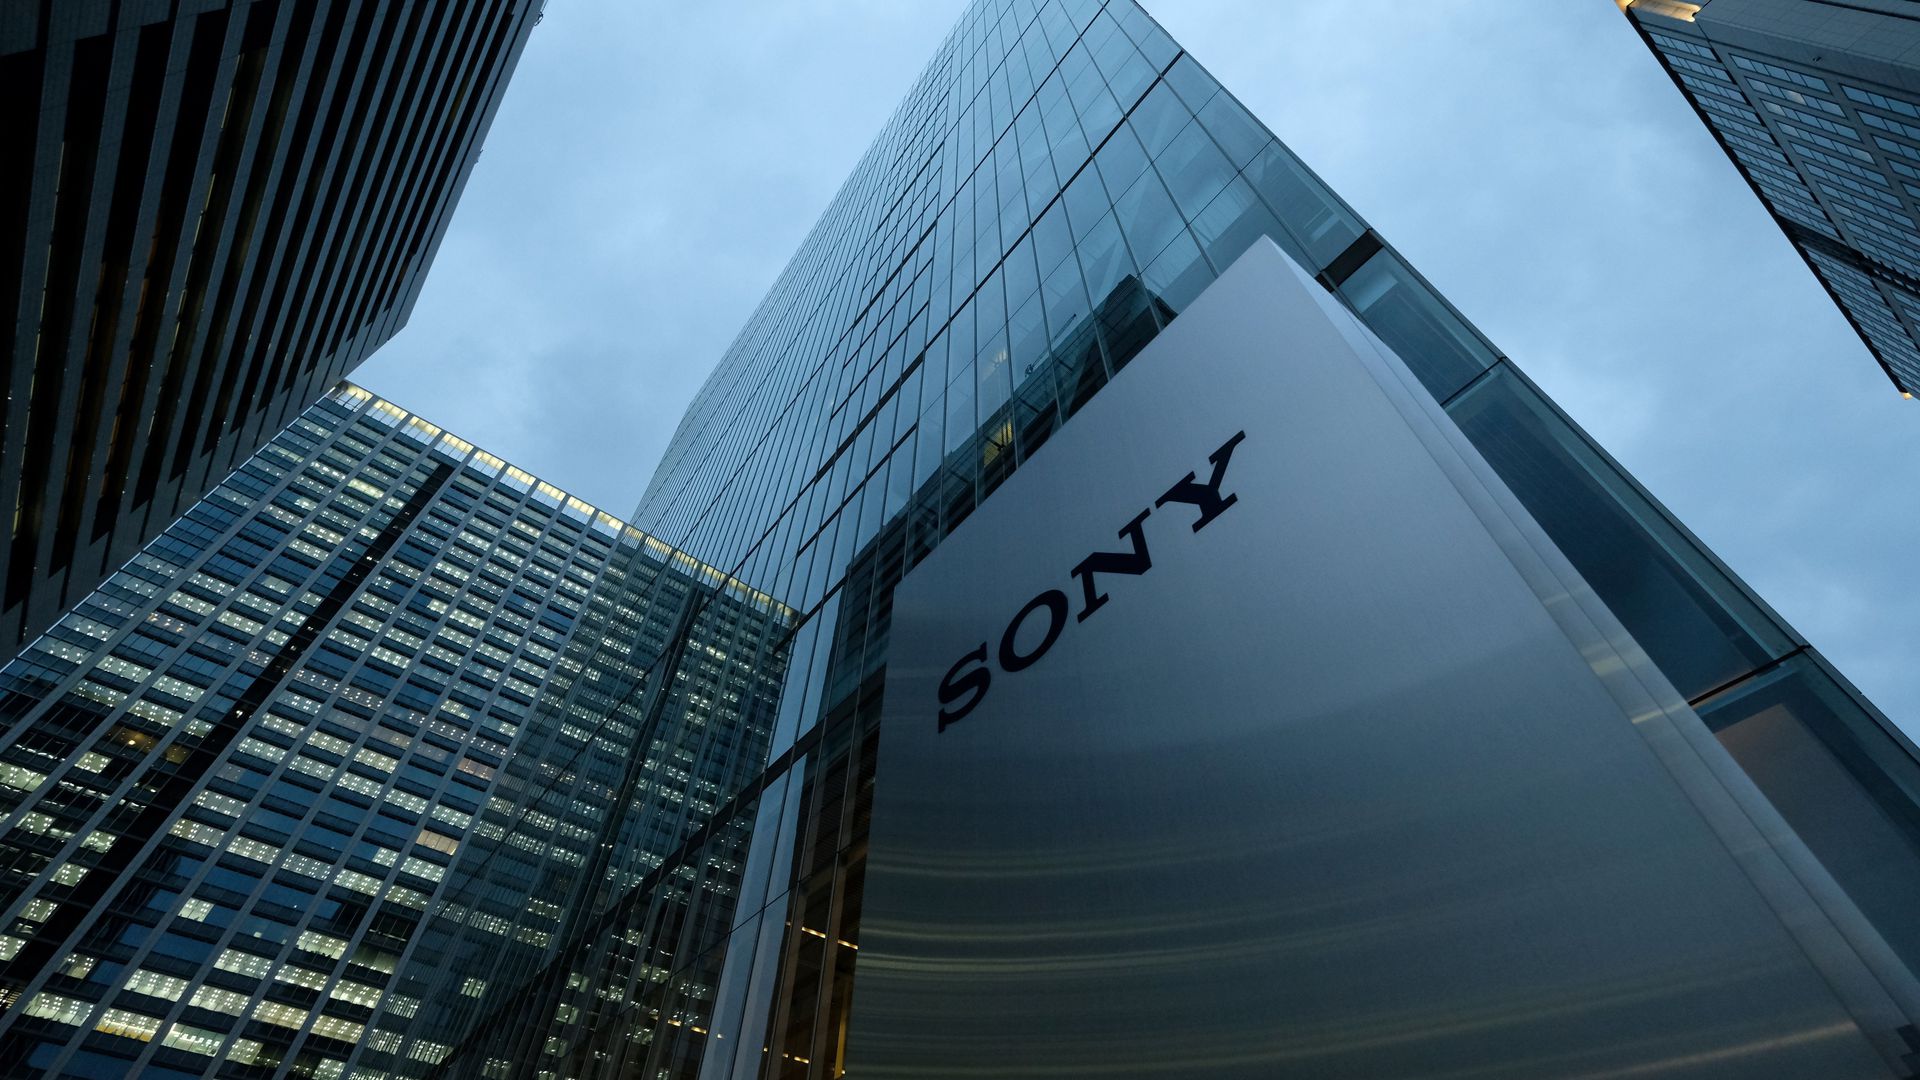 Films; Says People Playing Less Games as COVID-19 Restrictions Decrease" Sony Sees Profit Rise on Music